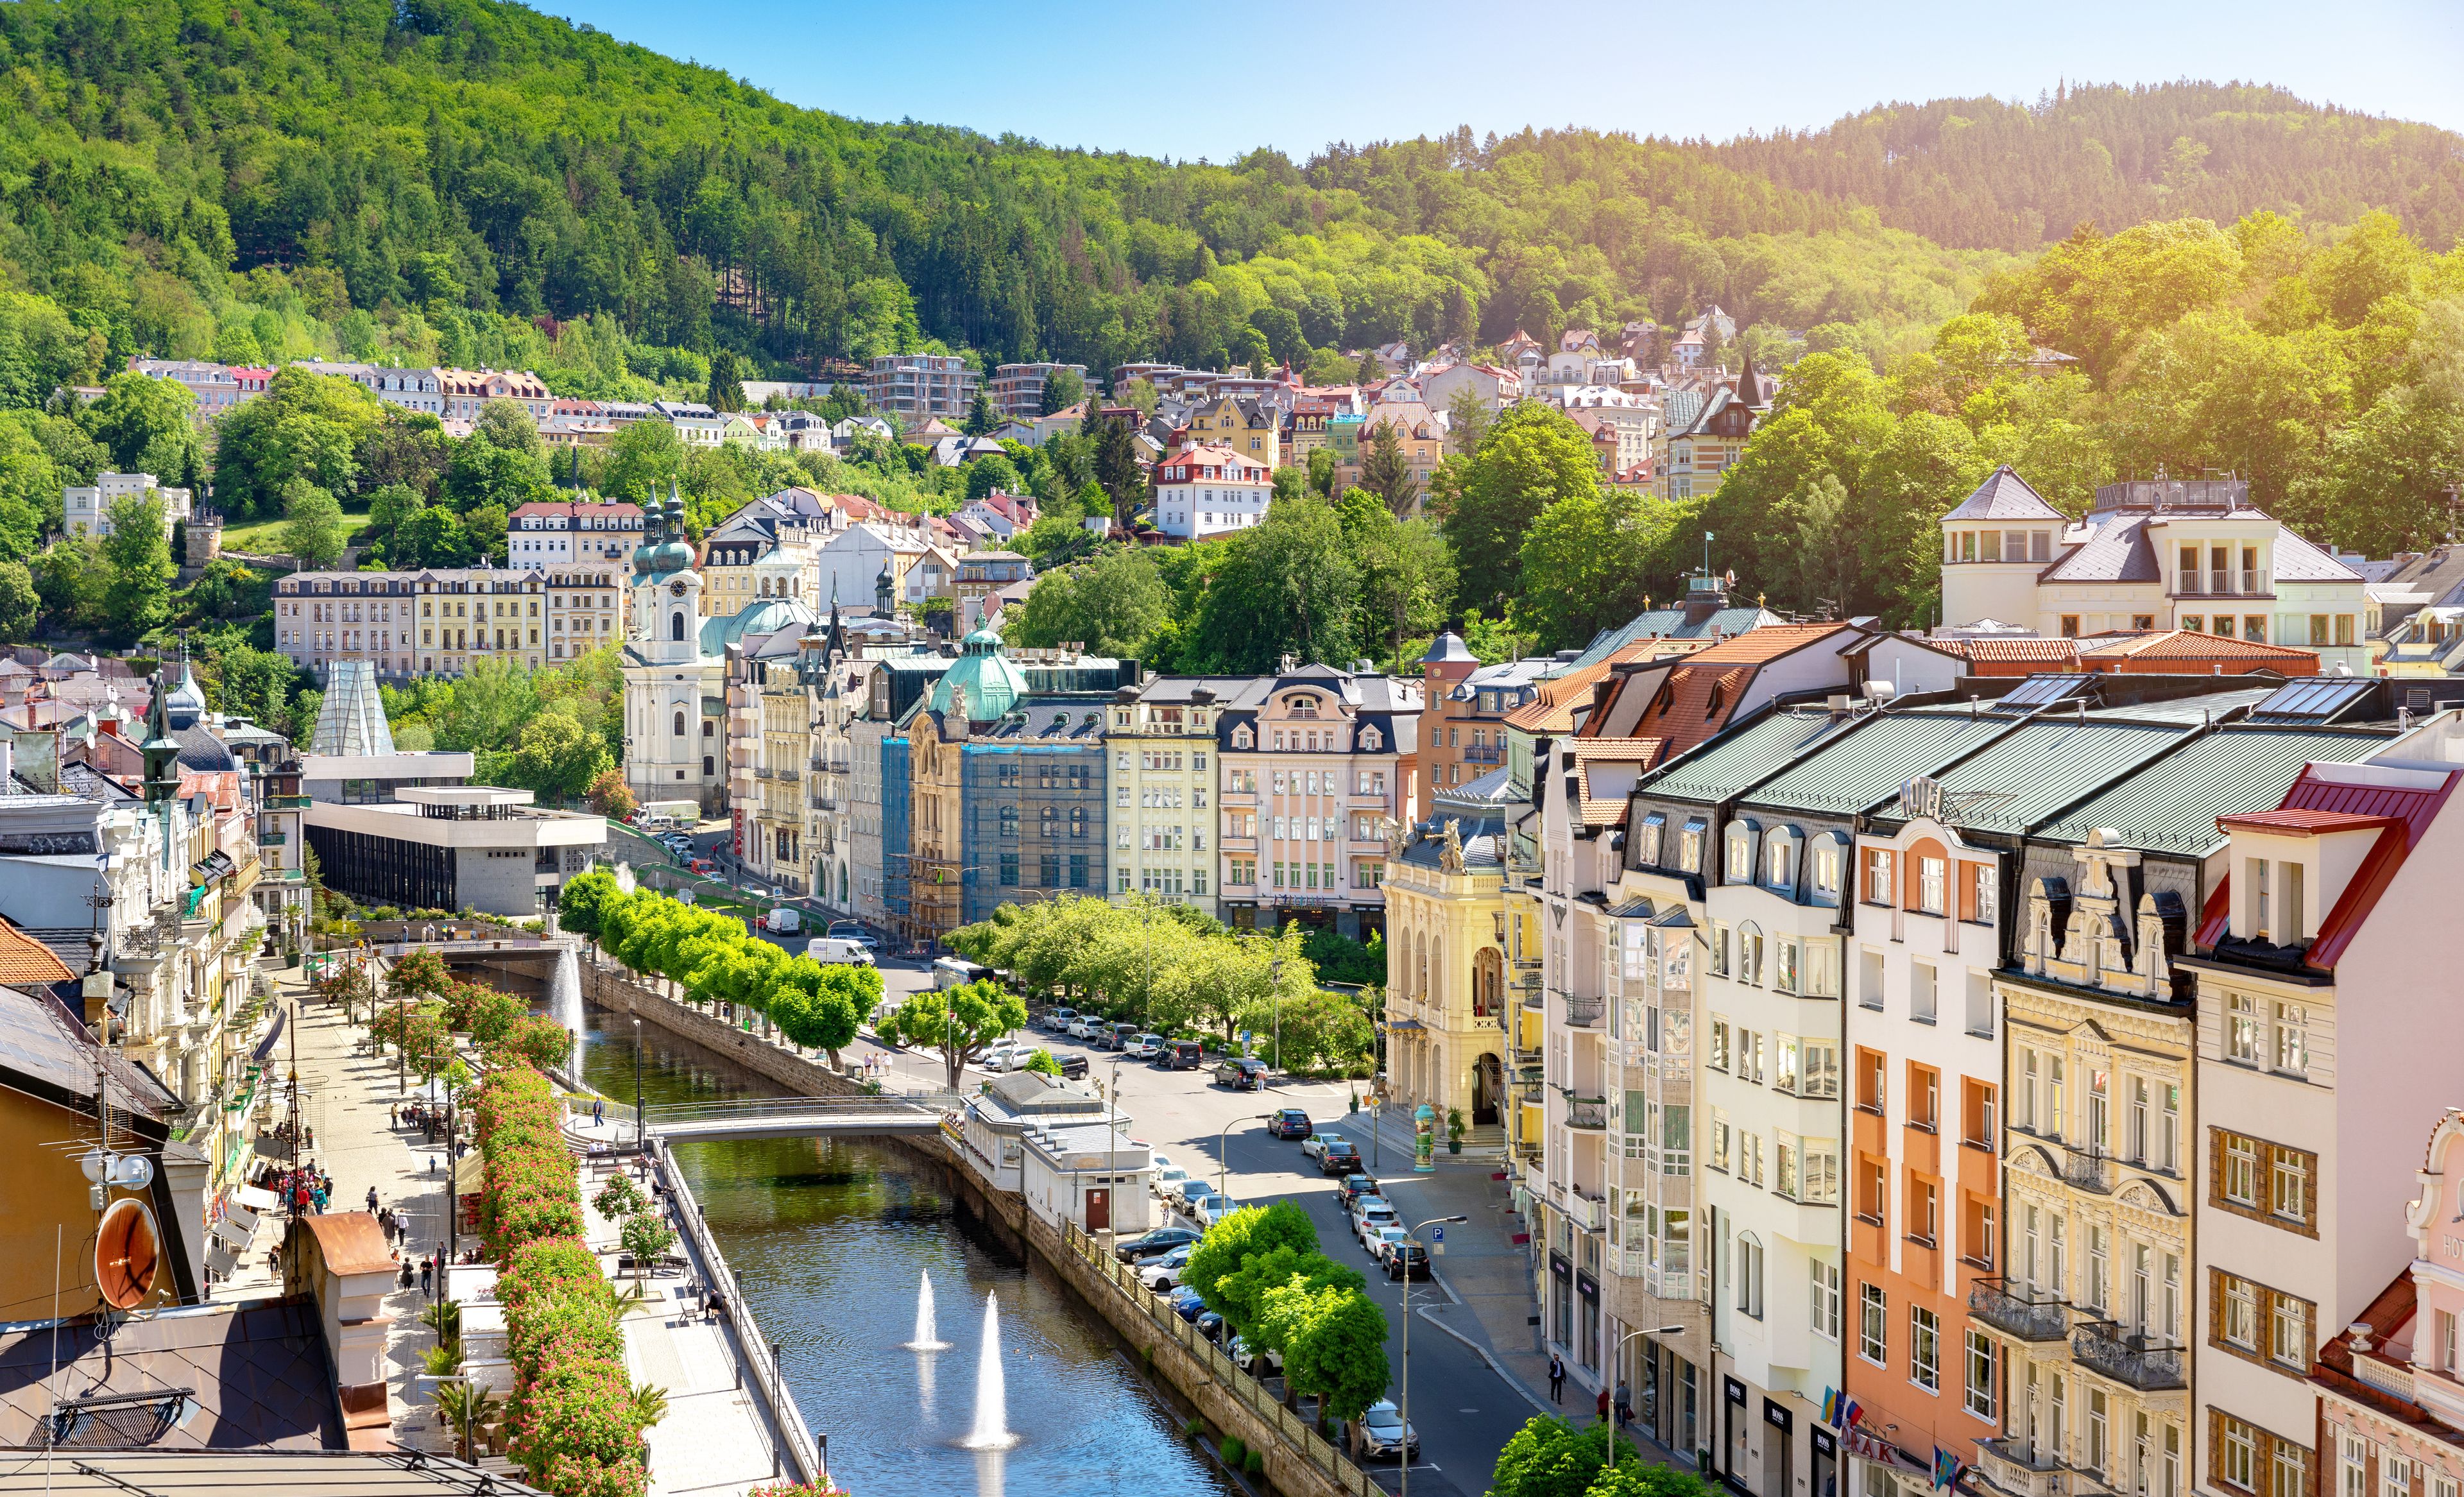 Old town of Karlovy Vary